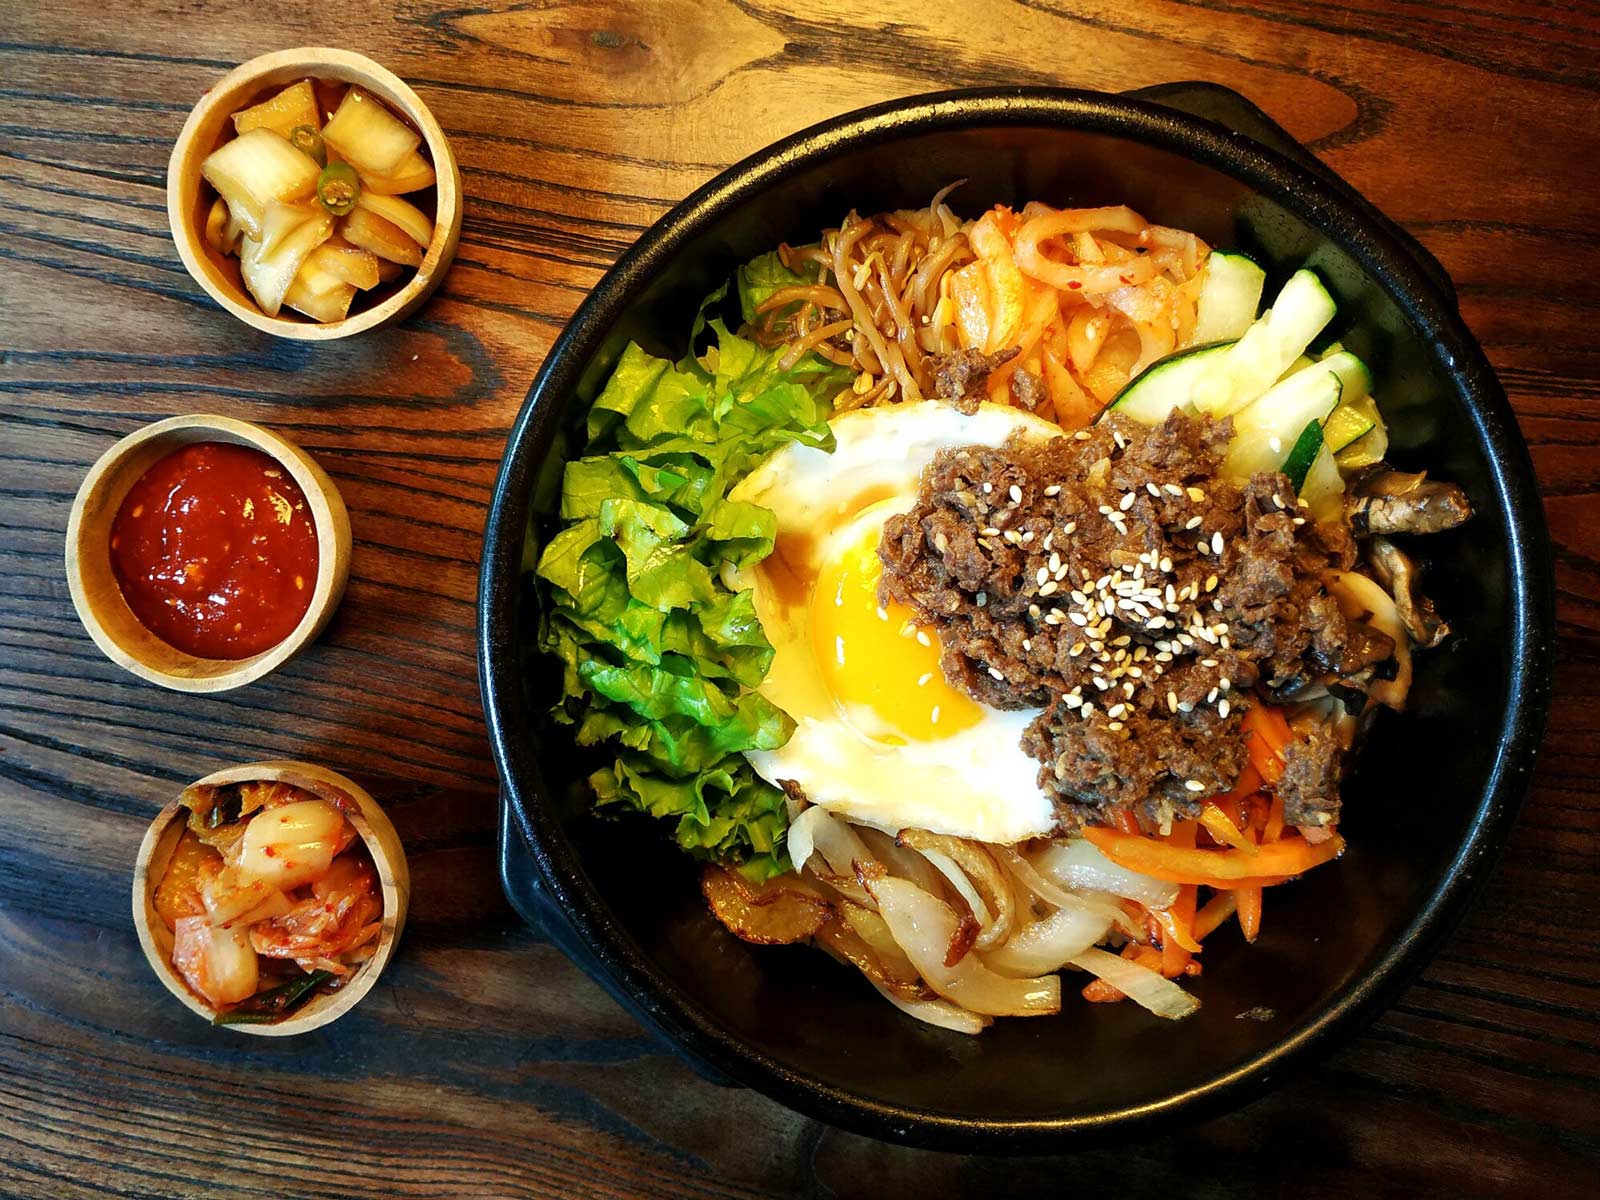 Best South Korean Food: 15 Korean Dishes To Try At Home or Abroad